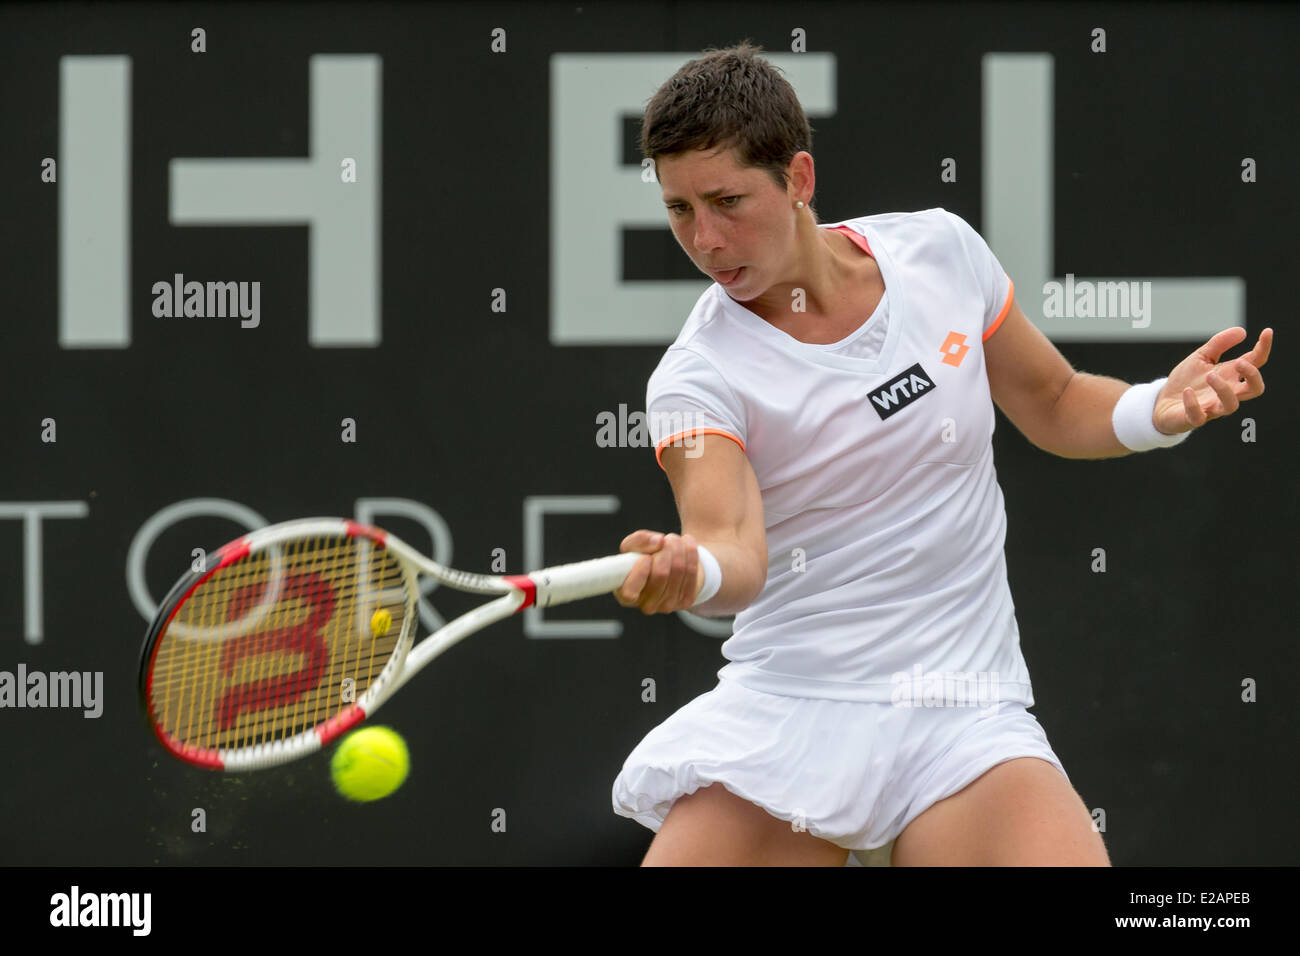 Tennis player Carla Suarez Navarro (ESP) hits a forehand during her 2nd round singles match of the Topshelf Open 2014 at Autotron, Rosmalen, Netherlands on 18.06.2014. She was playing against Jie Zheng from China. After losing the first set 5:7 and leading 1:0 in the 2nd, Suarez Navarro had to retire due to back problems. Photo: International-Sport-Photos Stock Photo